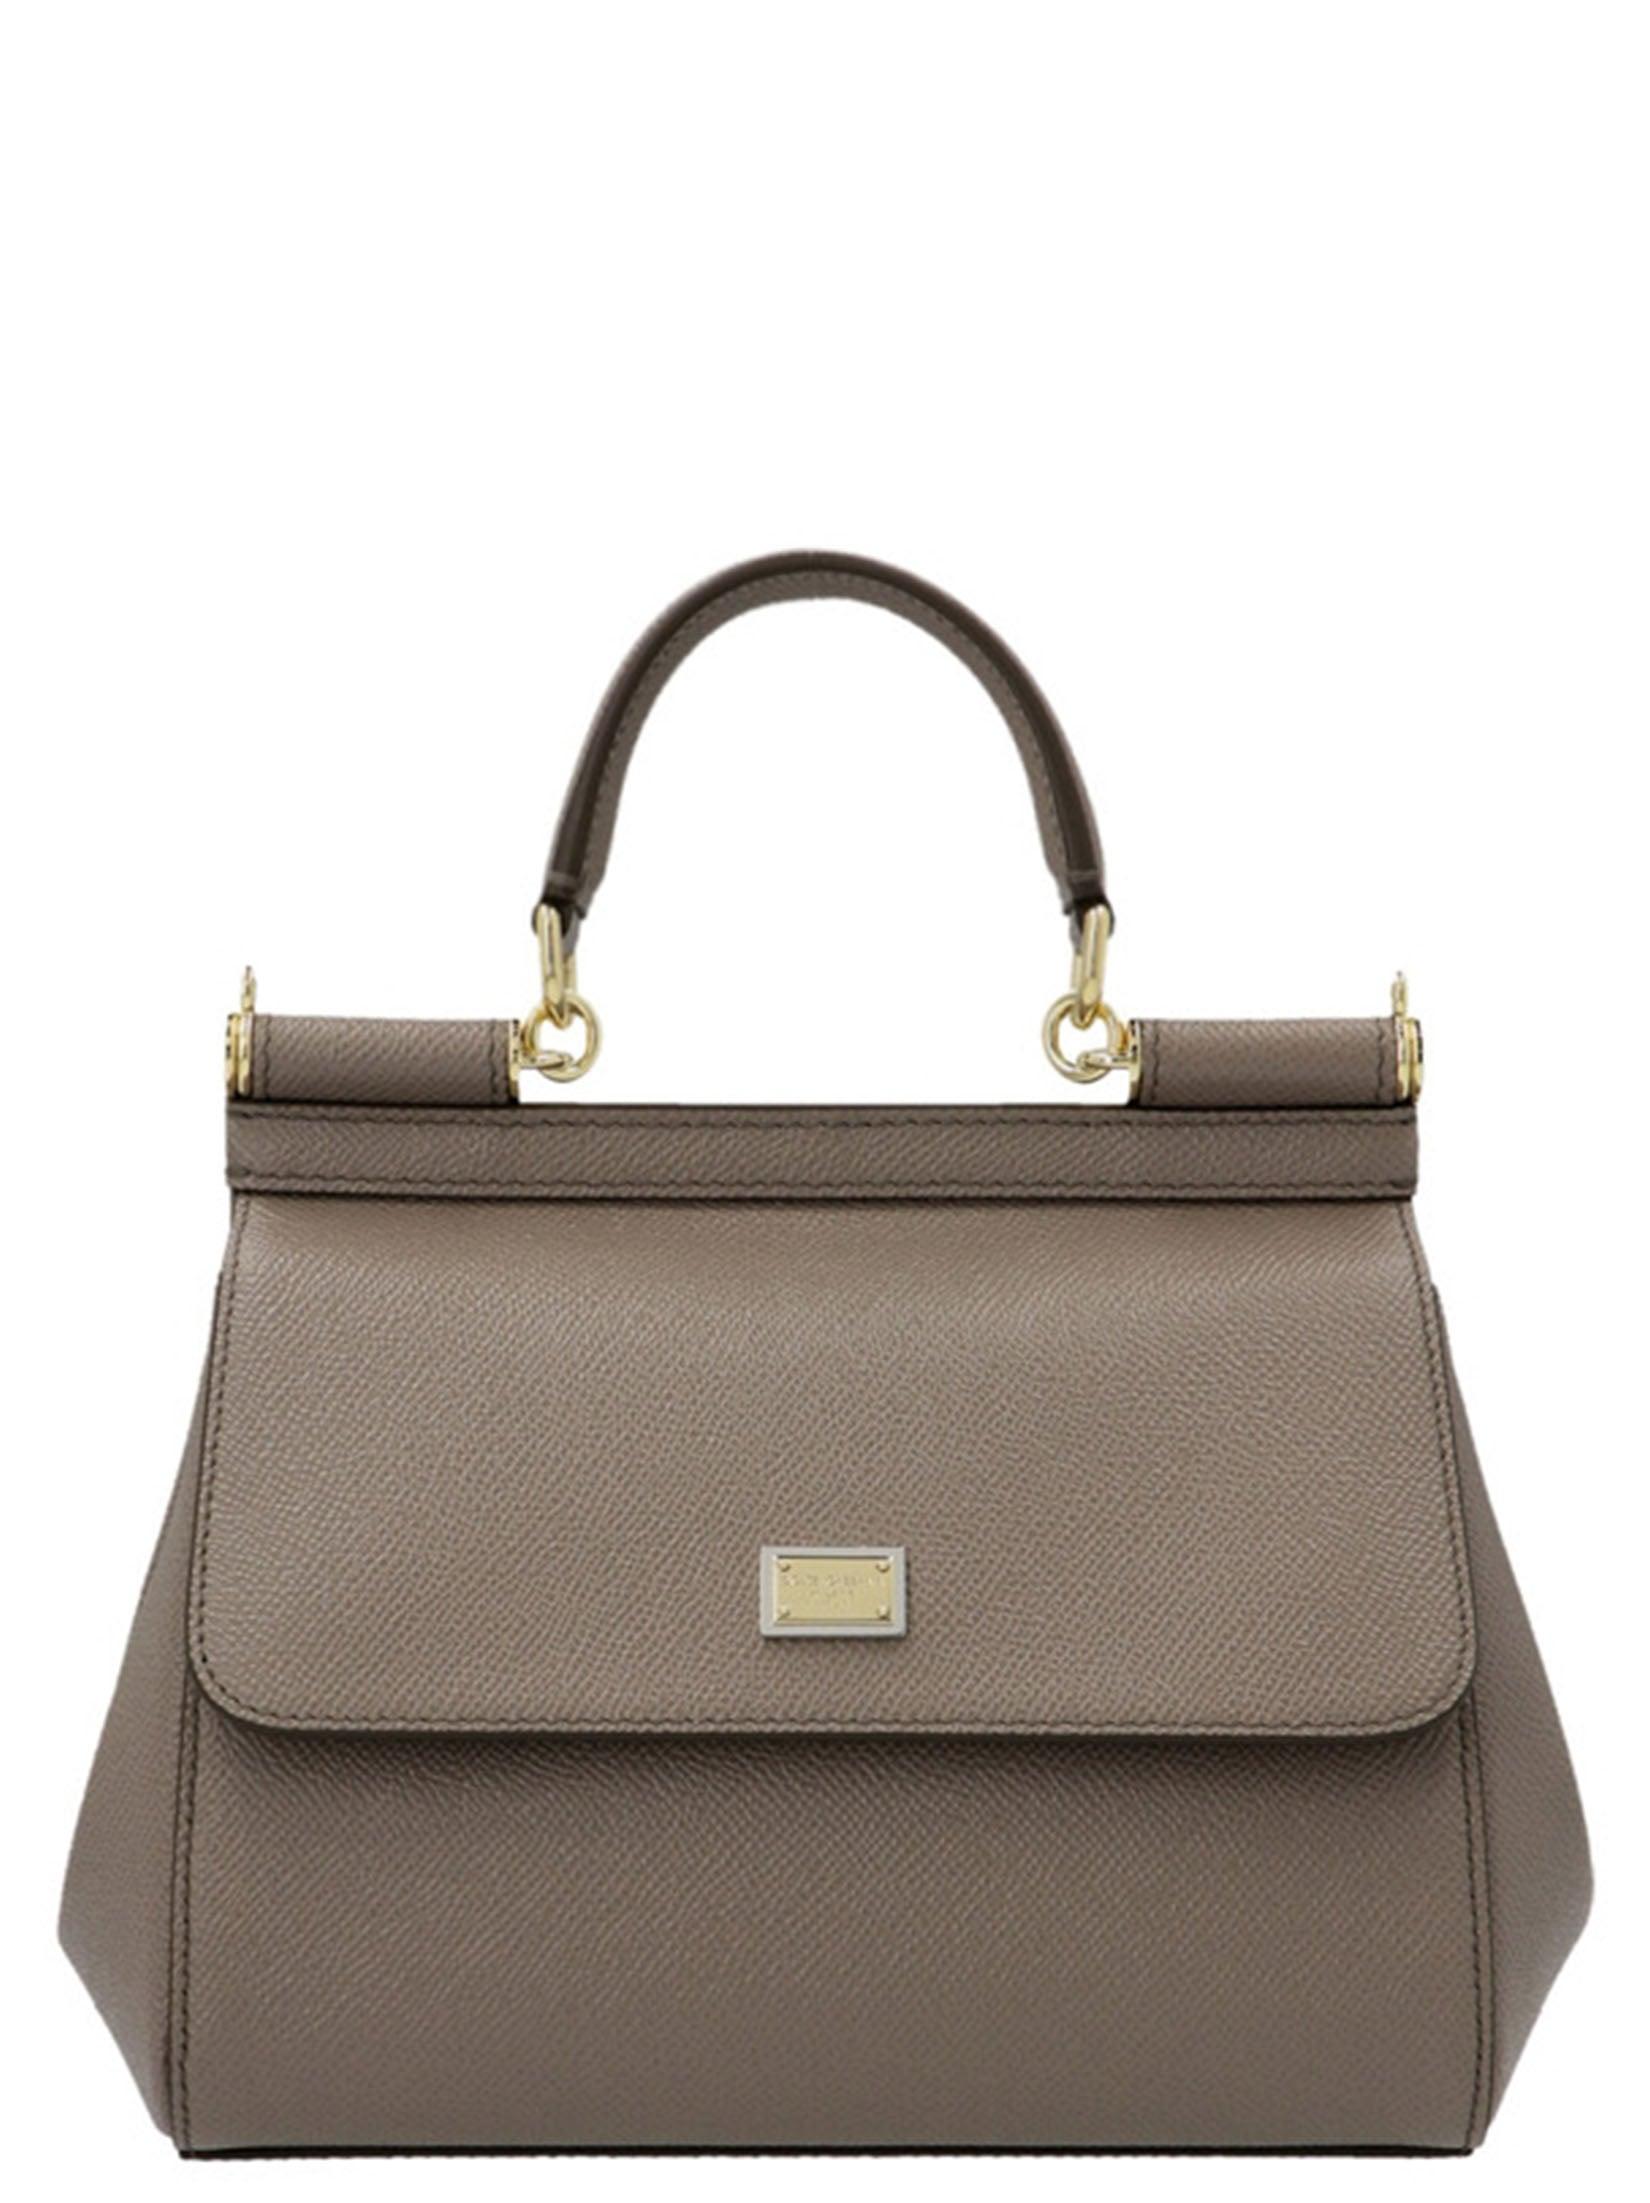 Dolce & Gabbana Sicily Hand Bags in Brown